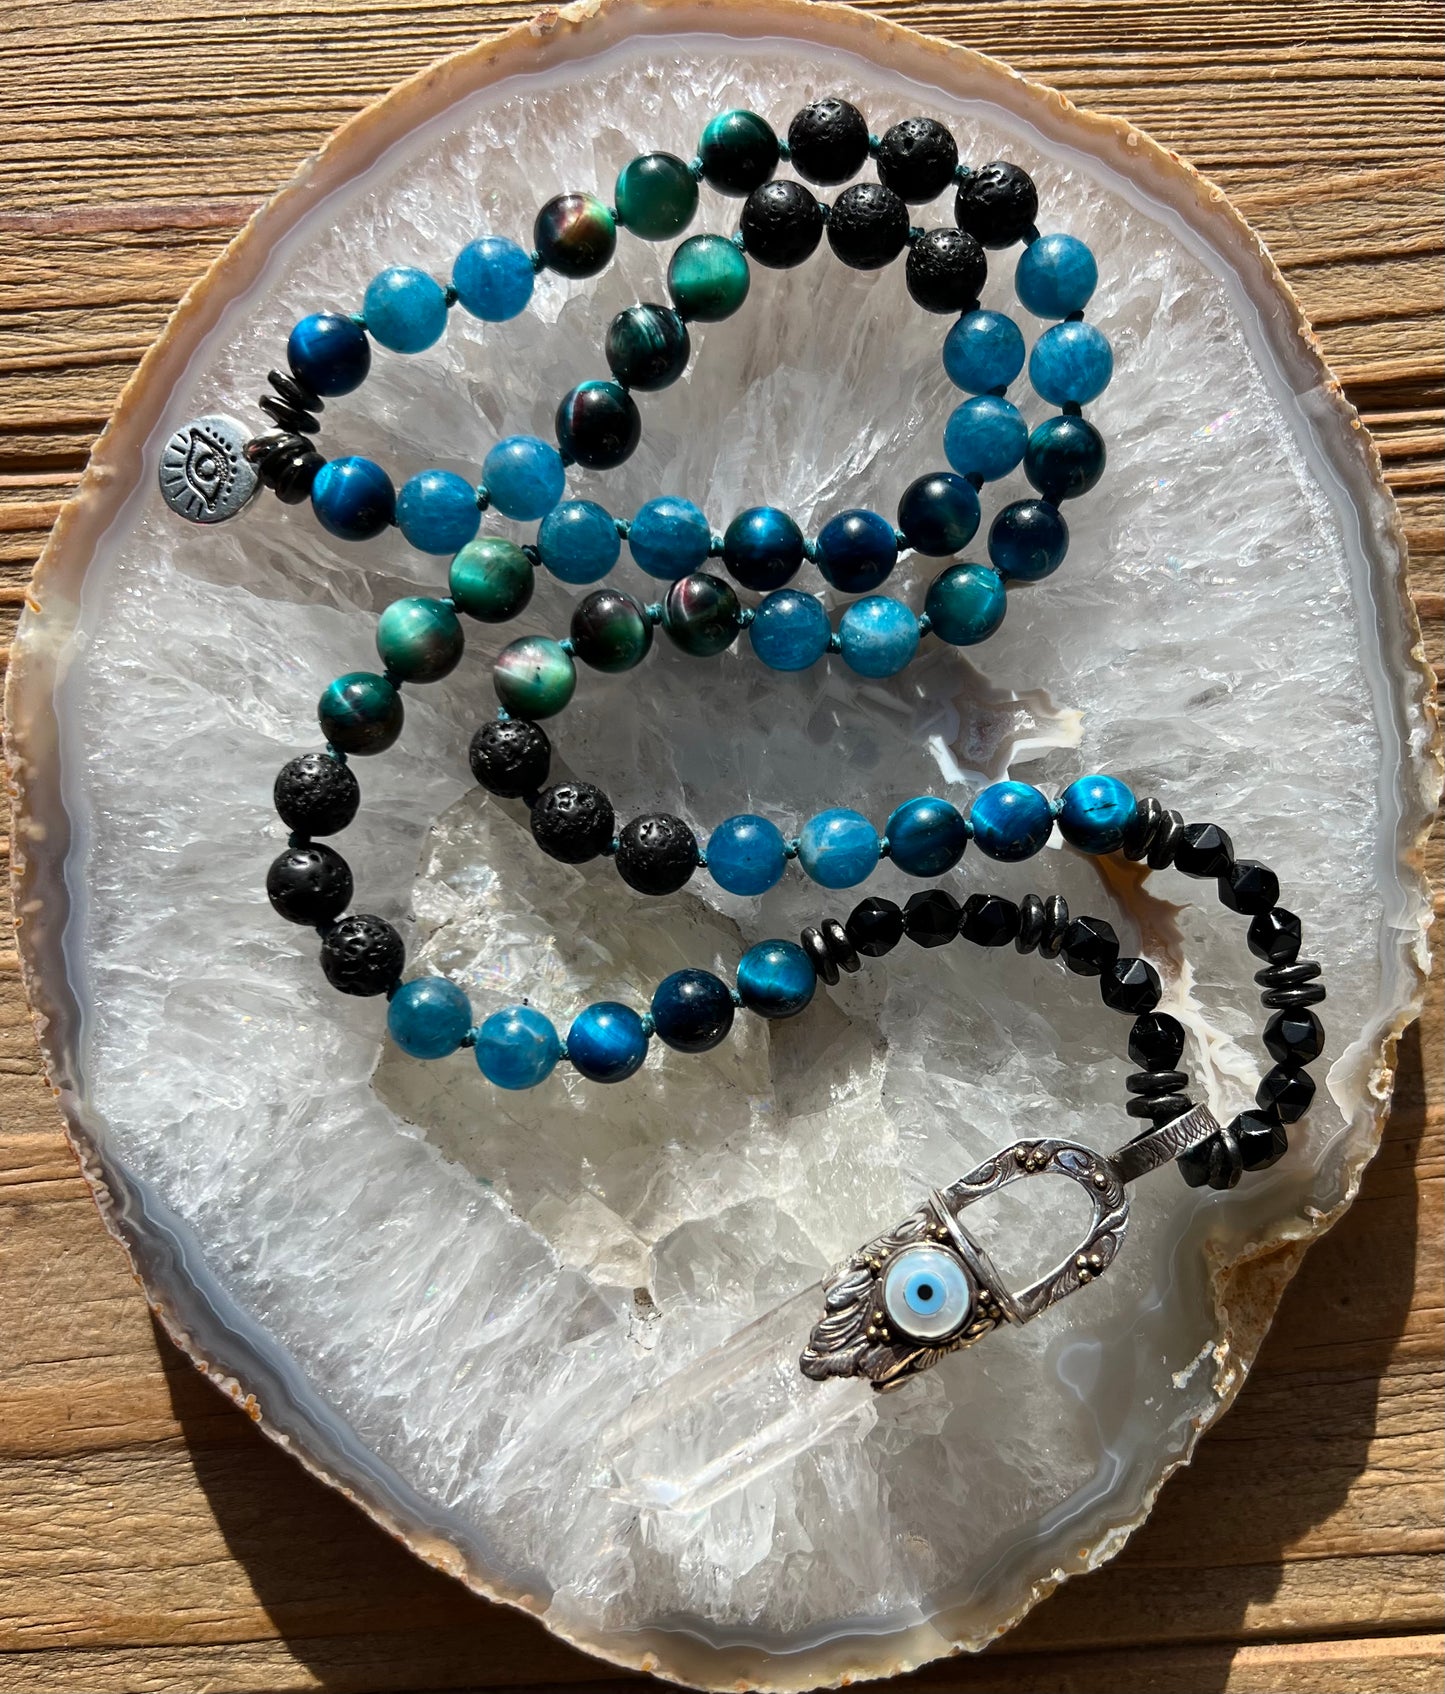 Mālā Half with Tigers Eye, Apatite Beads and a Clear Quartz Pendant